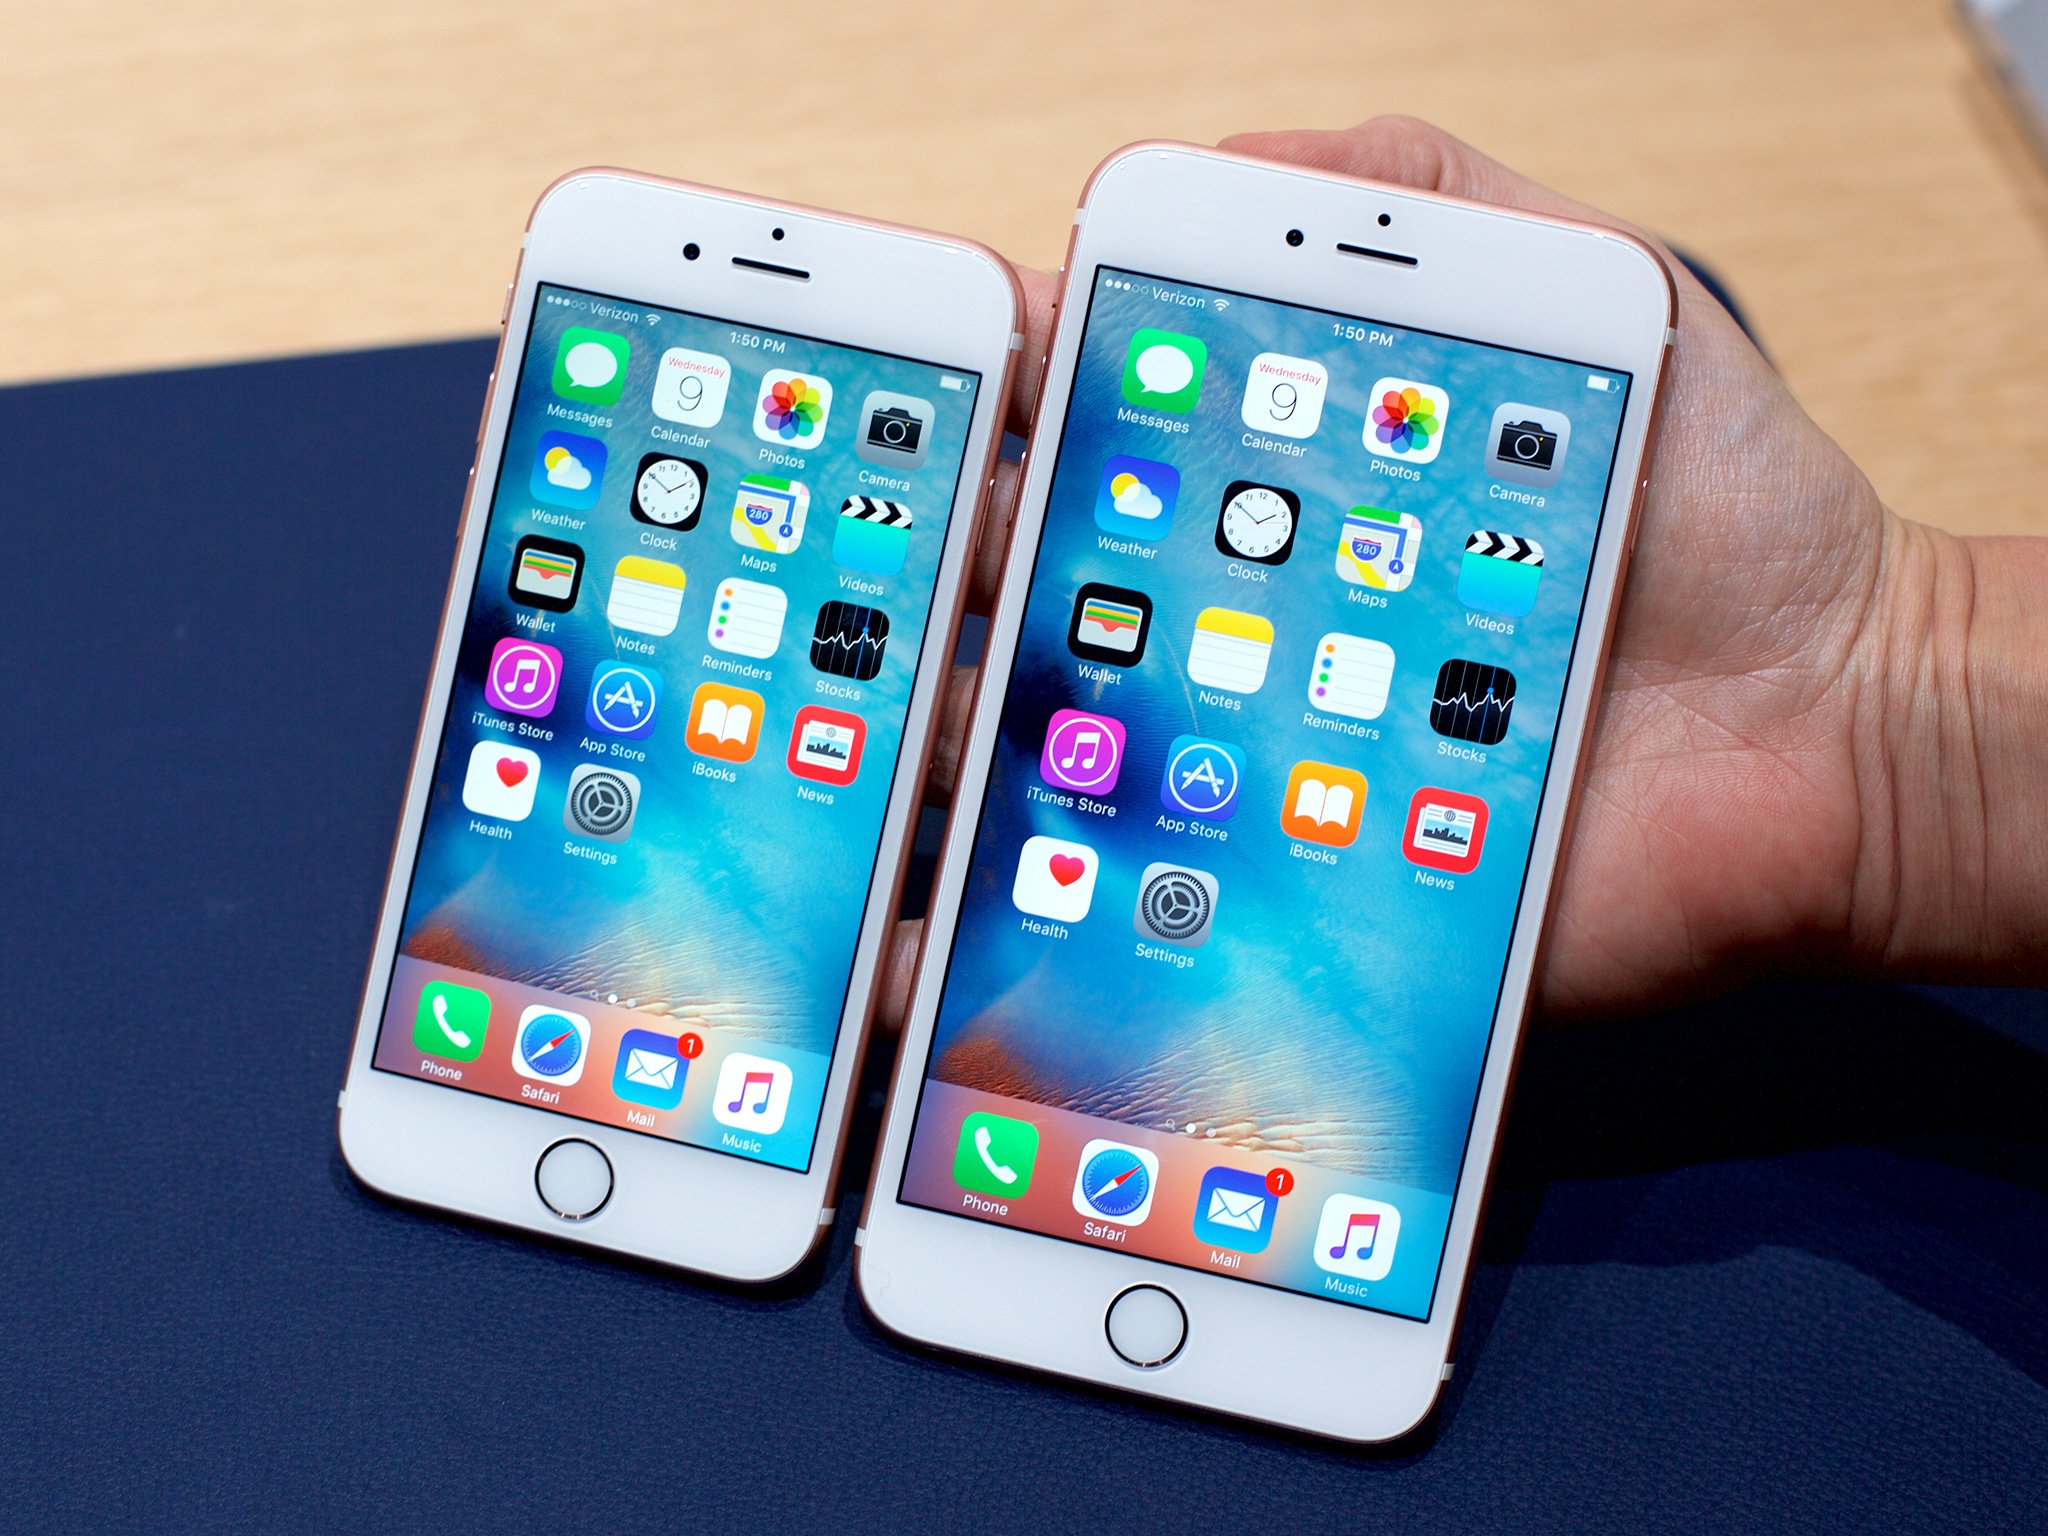 How to uy the iPhone 6s and iPhone 6s Plus in Canada